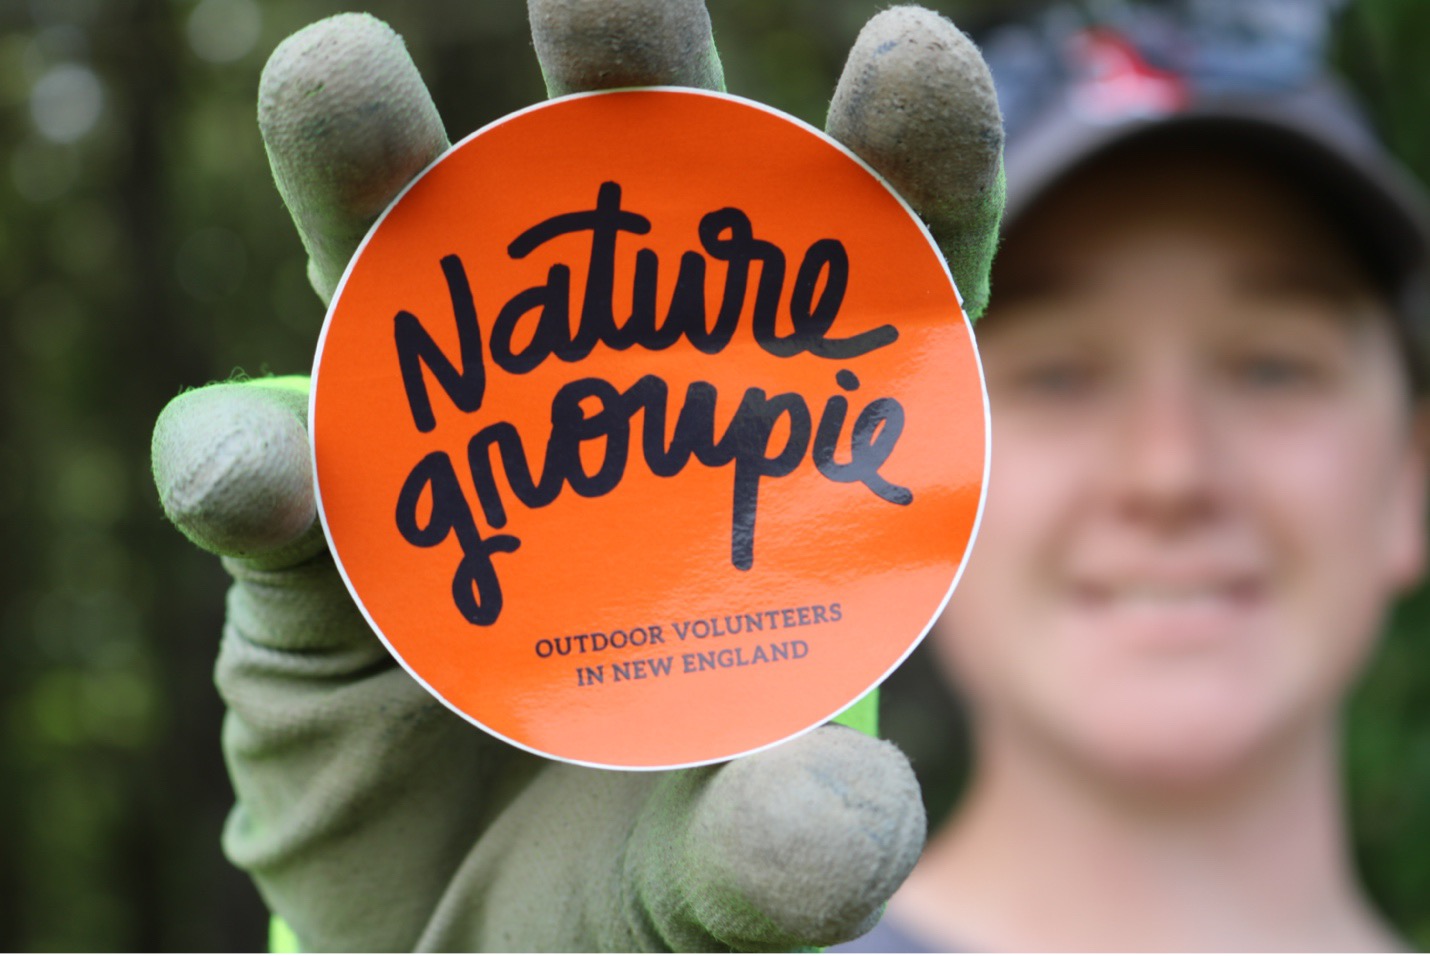 Maximizing Nature Groupie: Attracting Volunteers to Your Event